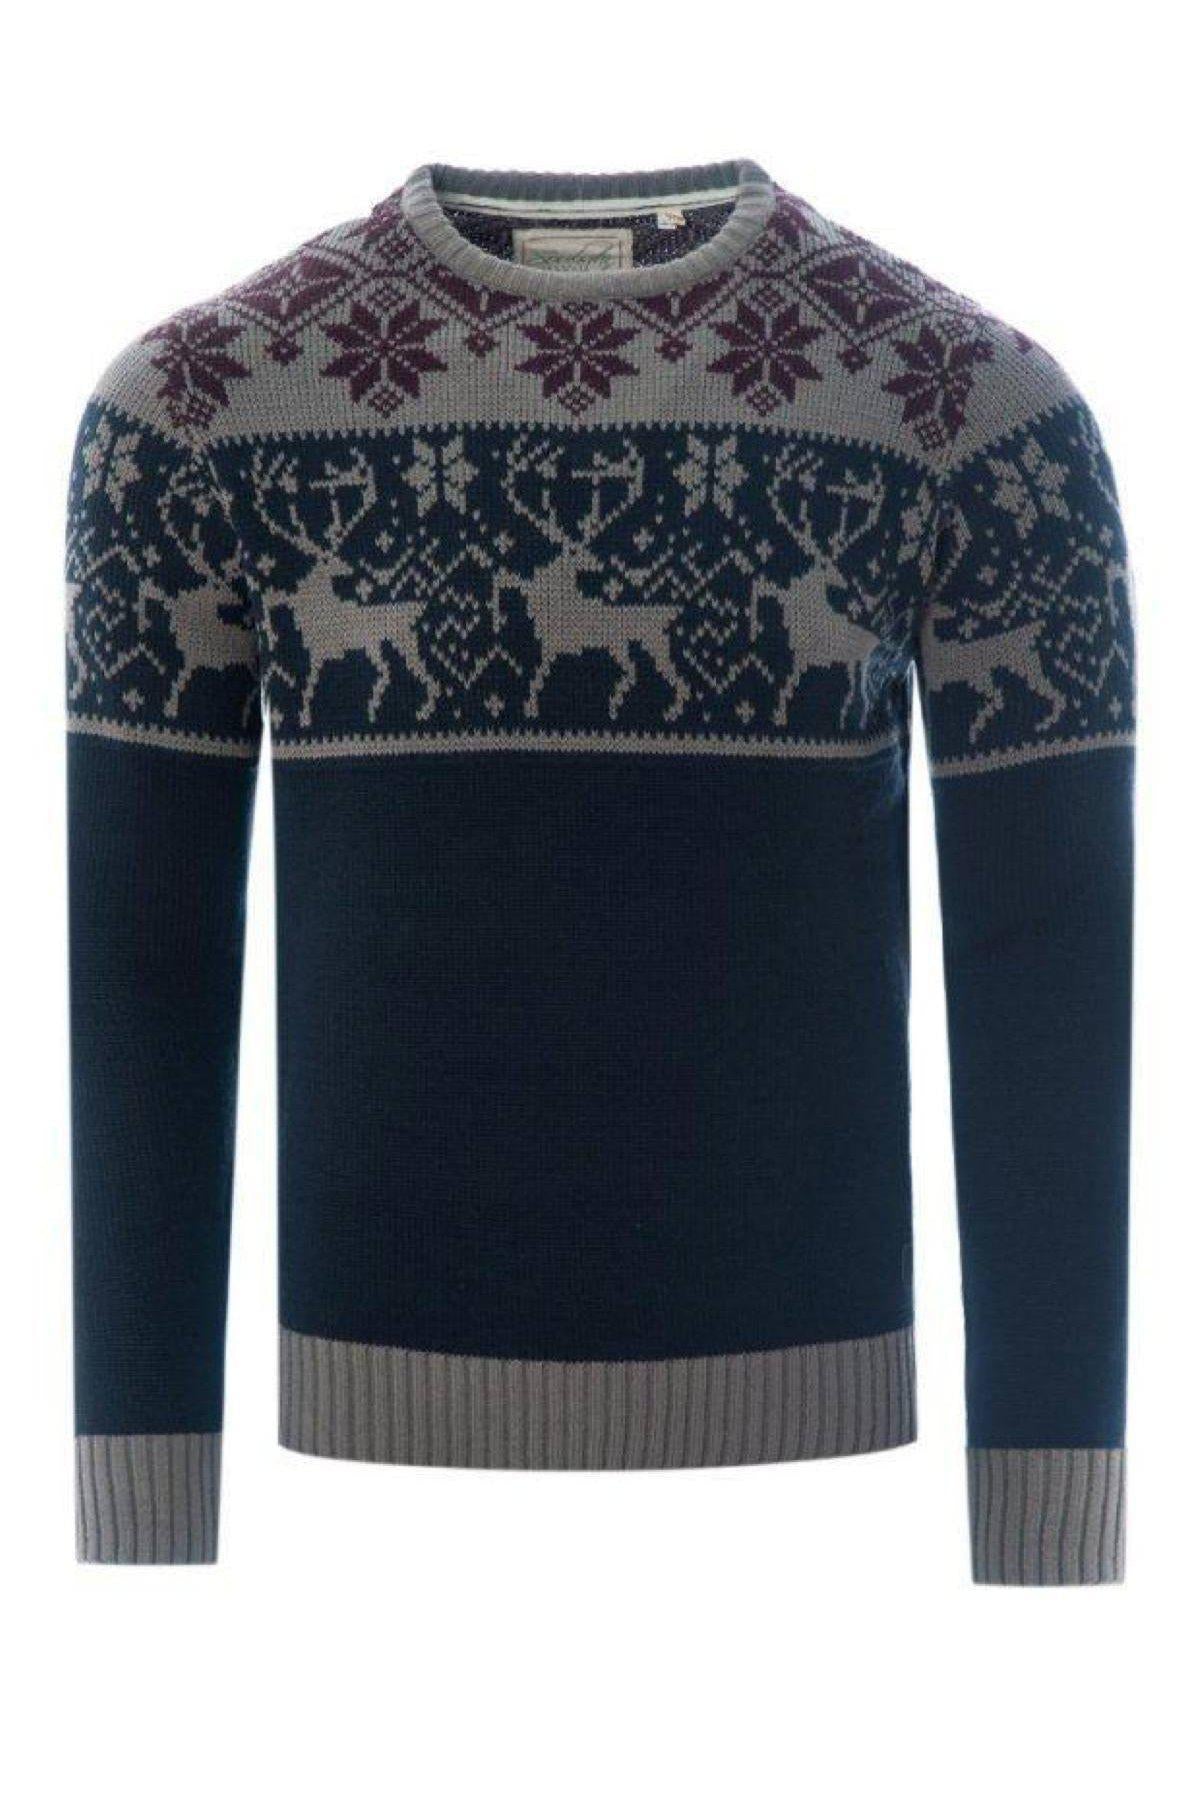 Stag Knit Navy